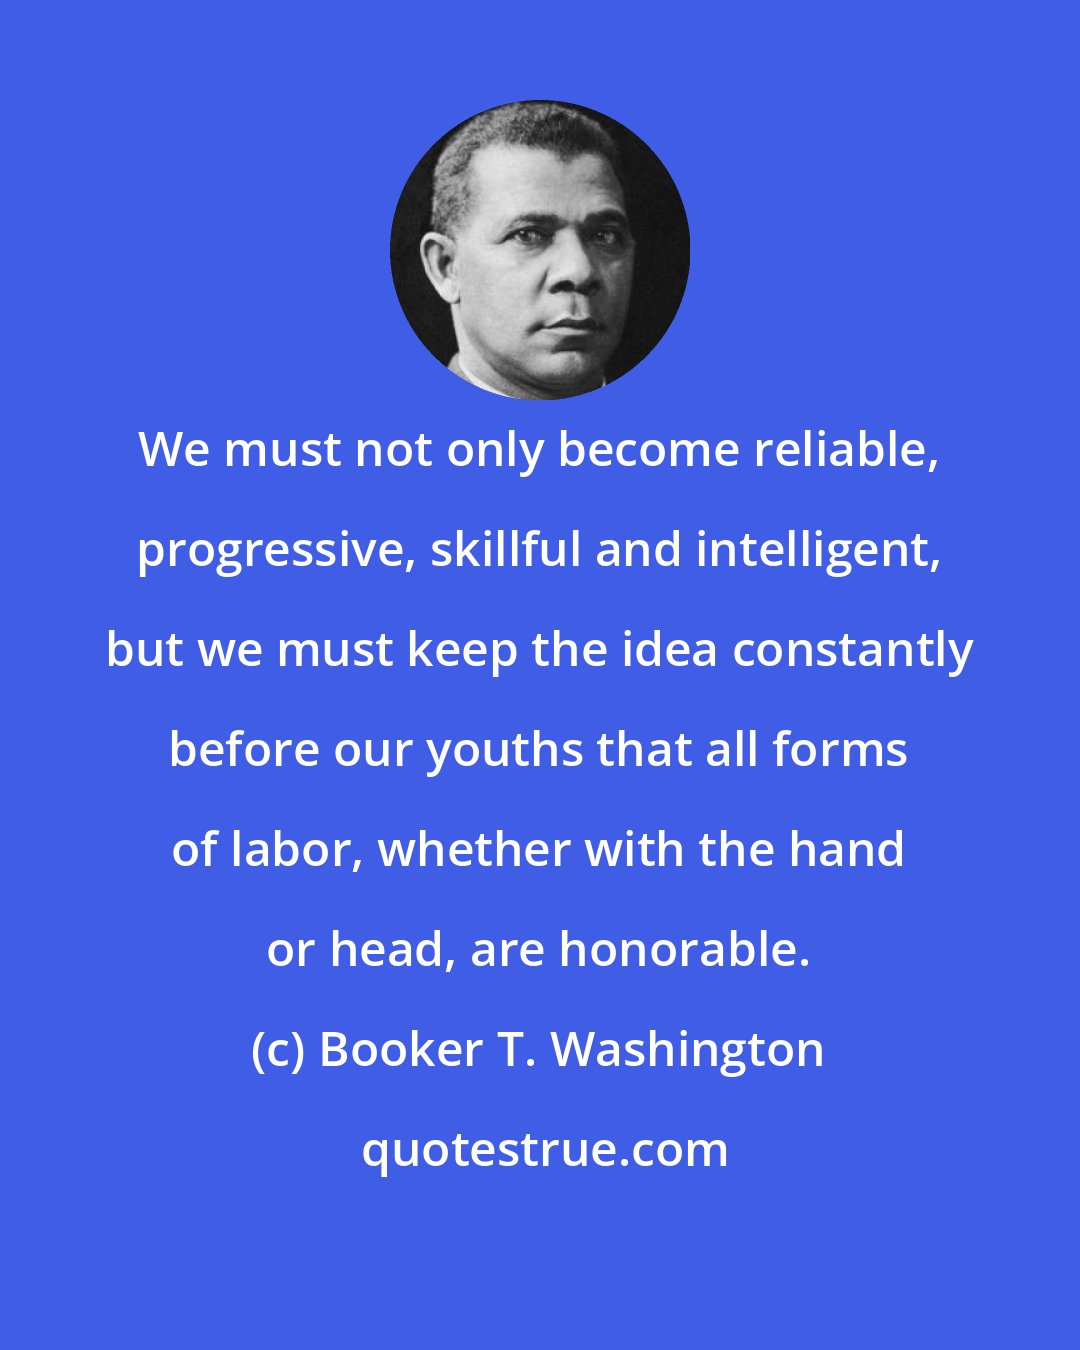 Booker T. Washington: We must not only become reliable, progressive, skillful and intelligent, but we must keep the idea constantly before our youths that all forms of labor, whether with the hand or head, are honorable.